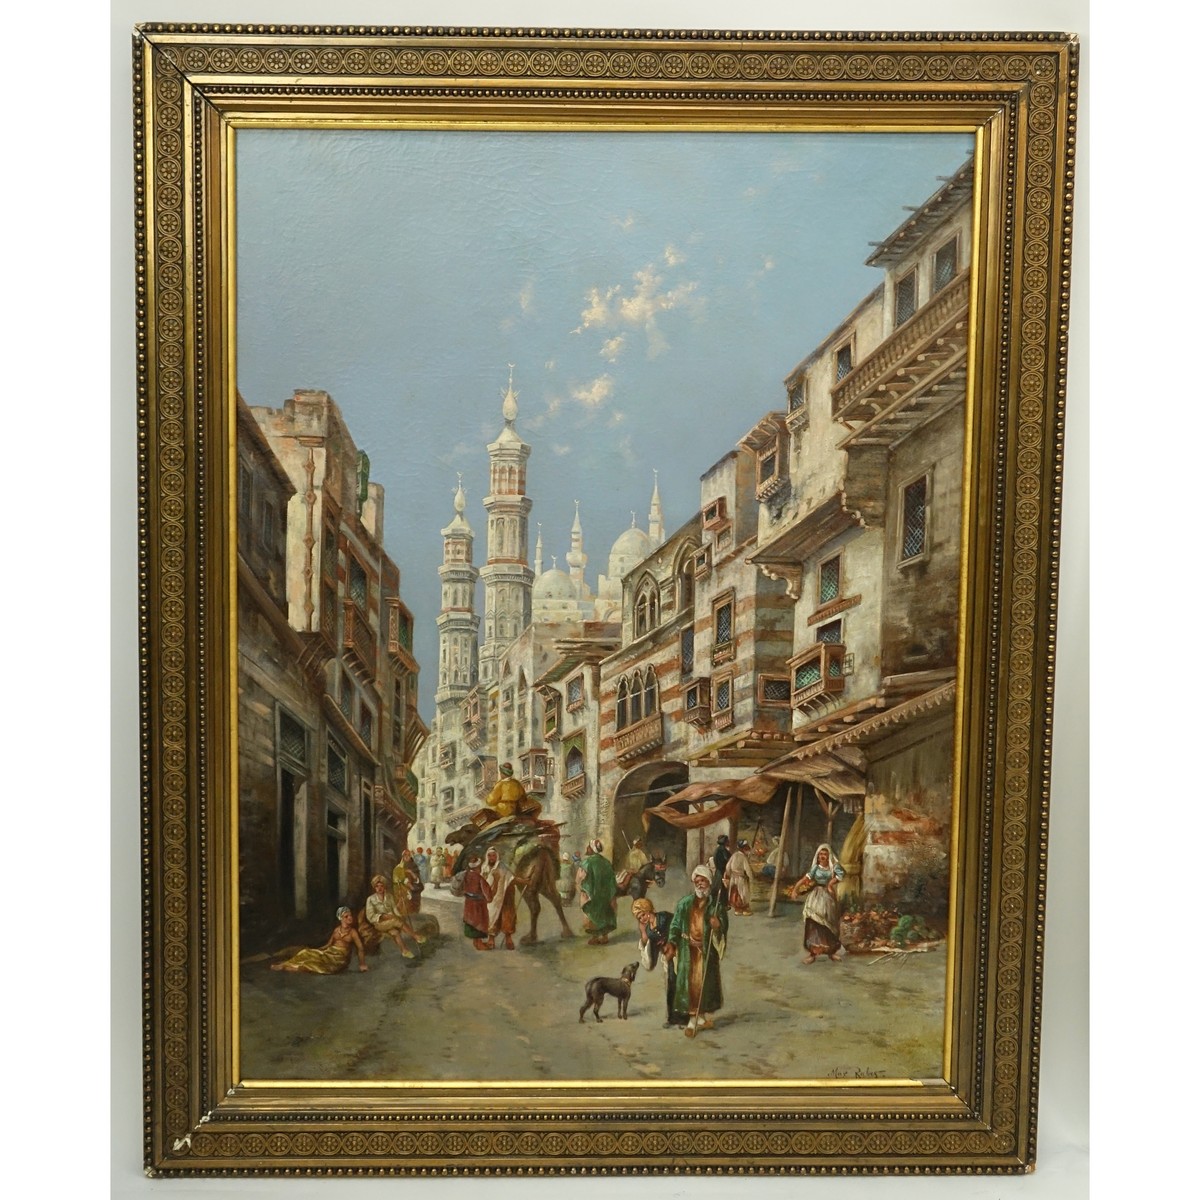 Max Friedrich Rabes, German (1868 - 1944) Oil on Canvas, Street Scene in Cairo, Signed Lower Right. Craquelure and light yellow spotting.